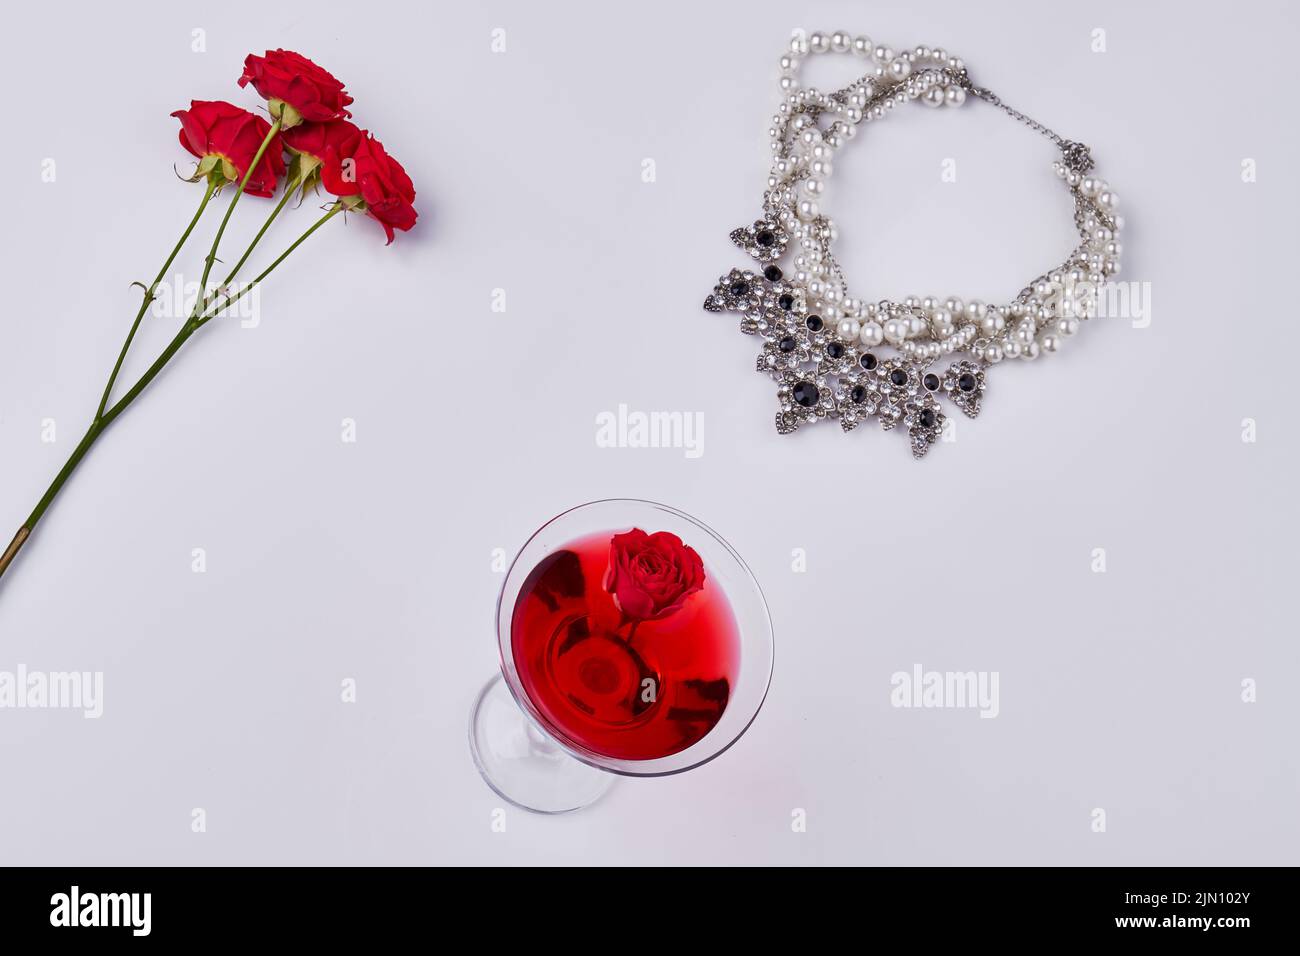 Flat lay womens accessories on white background. Red cocktail with rose flowers and necklace. Stock Photo